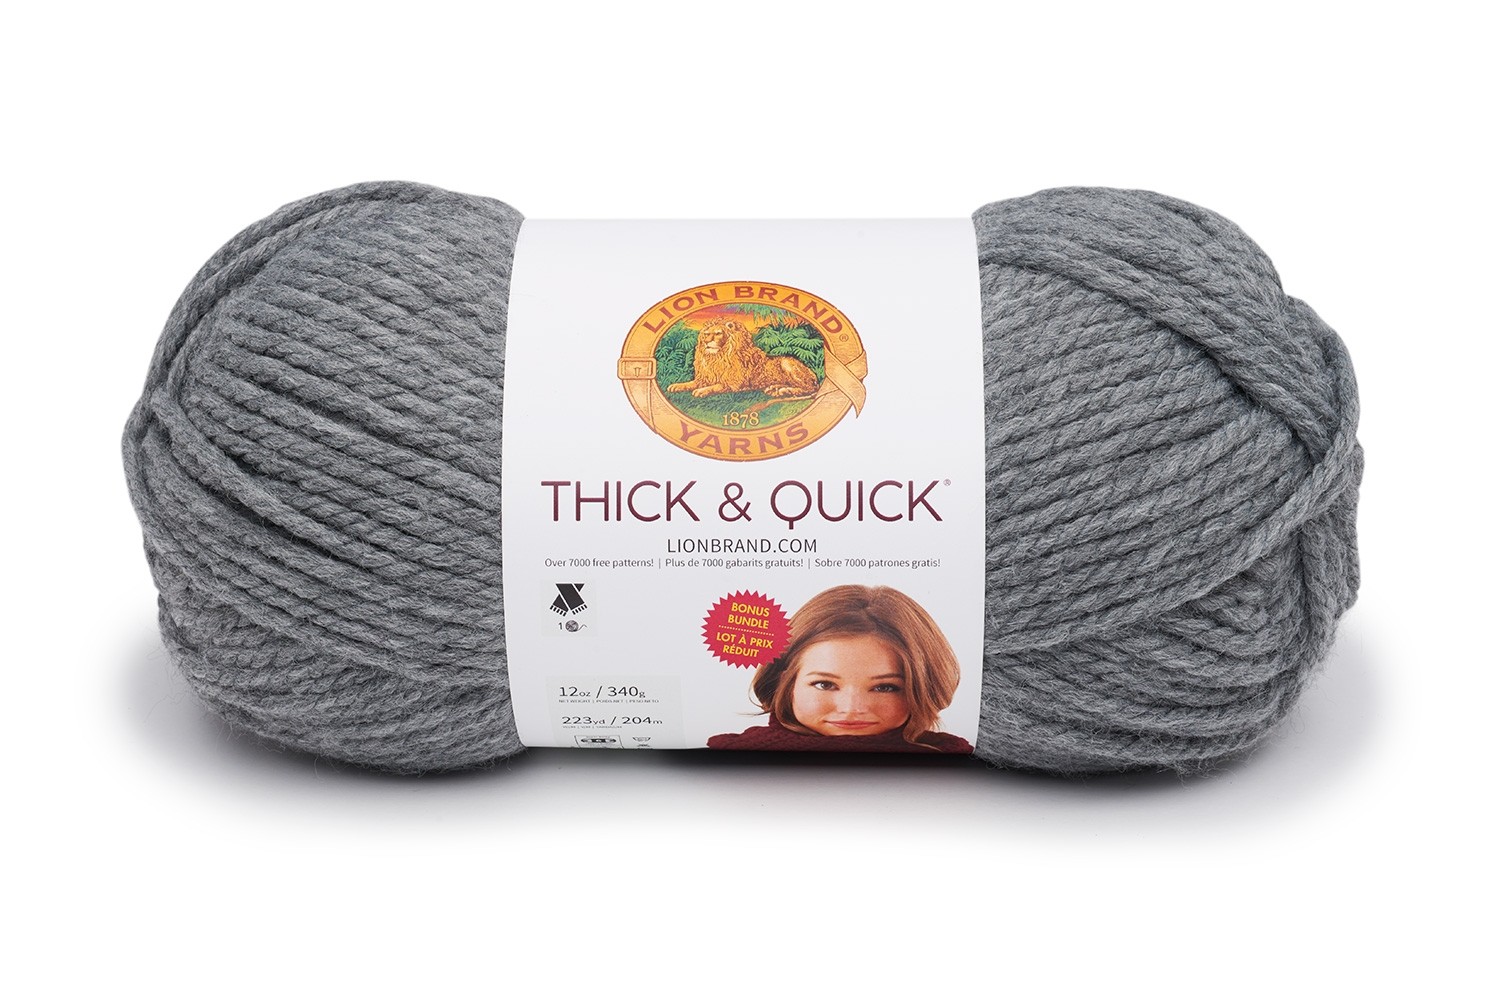 Thick & Quick in Oxford Grey